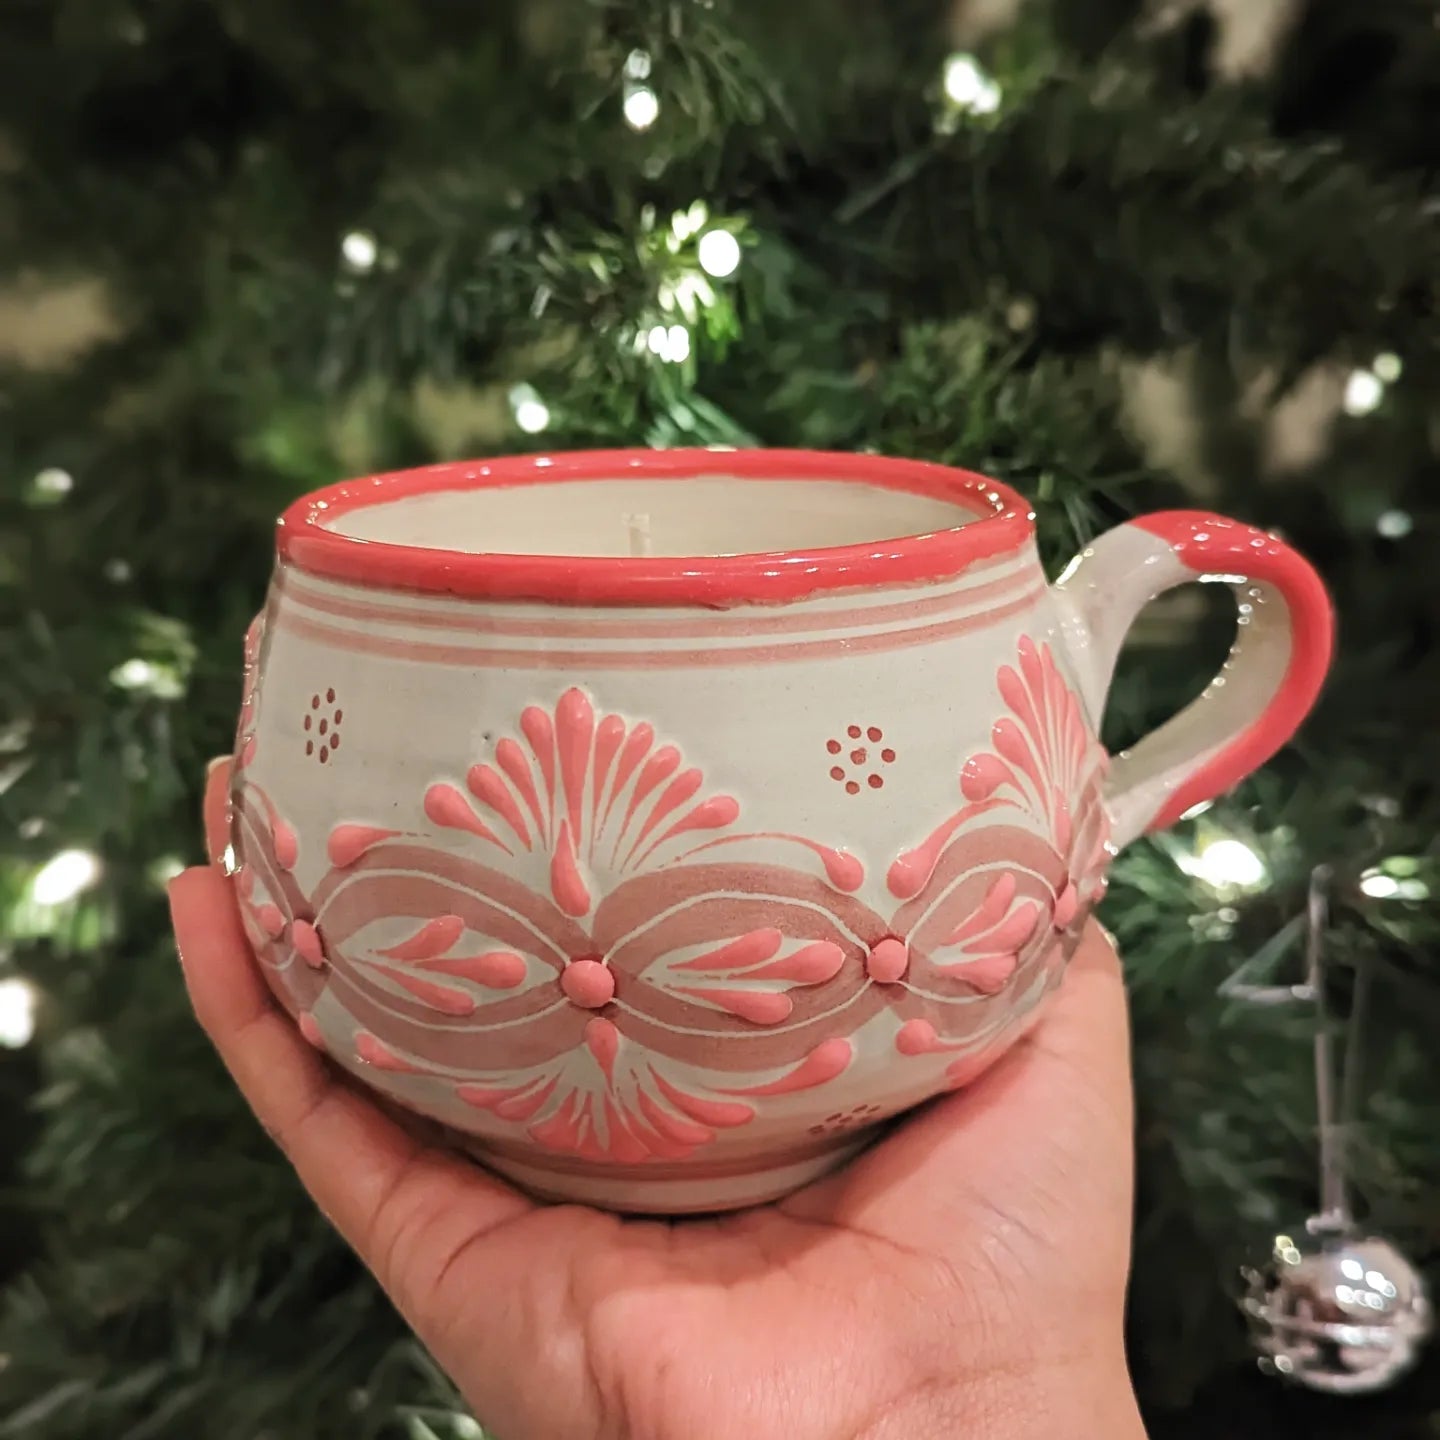 A hand holding an Artisanal candle in a beautiful light pink and biege handmade design talavera cup with a handle. Handcrafted by Artisan in Puebla, Mexico. 100% All Natural Soy Candle. Reuse the talavera as home decor or storage.